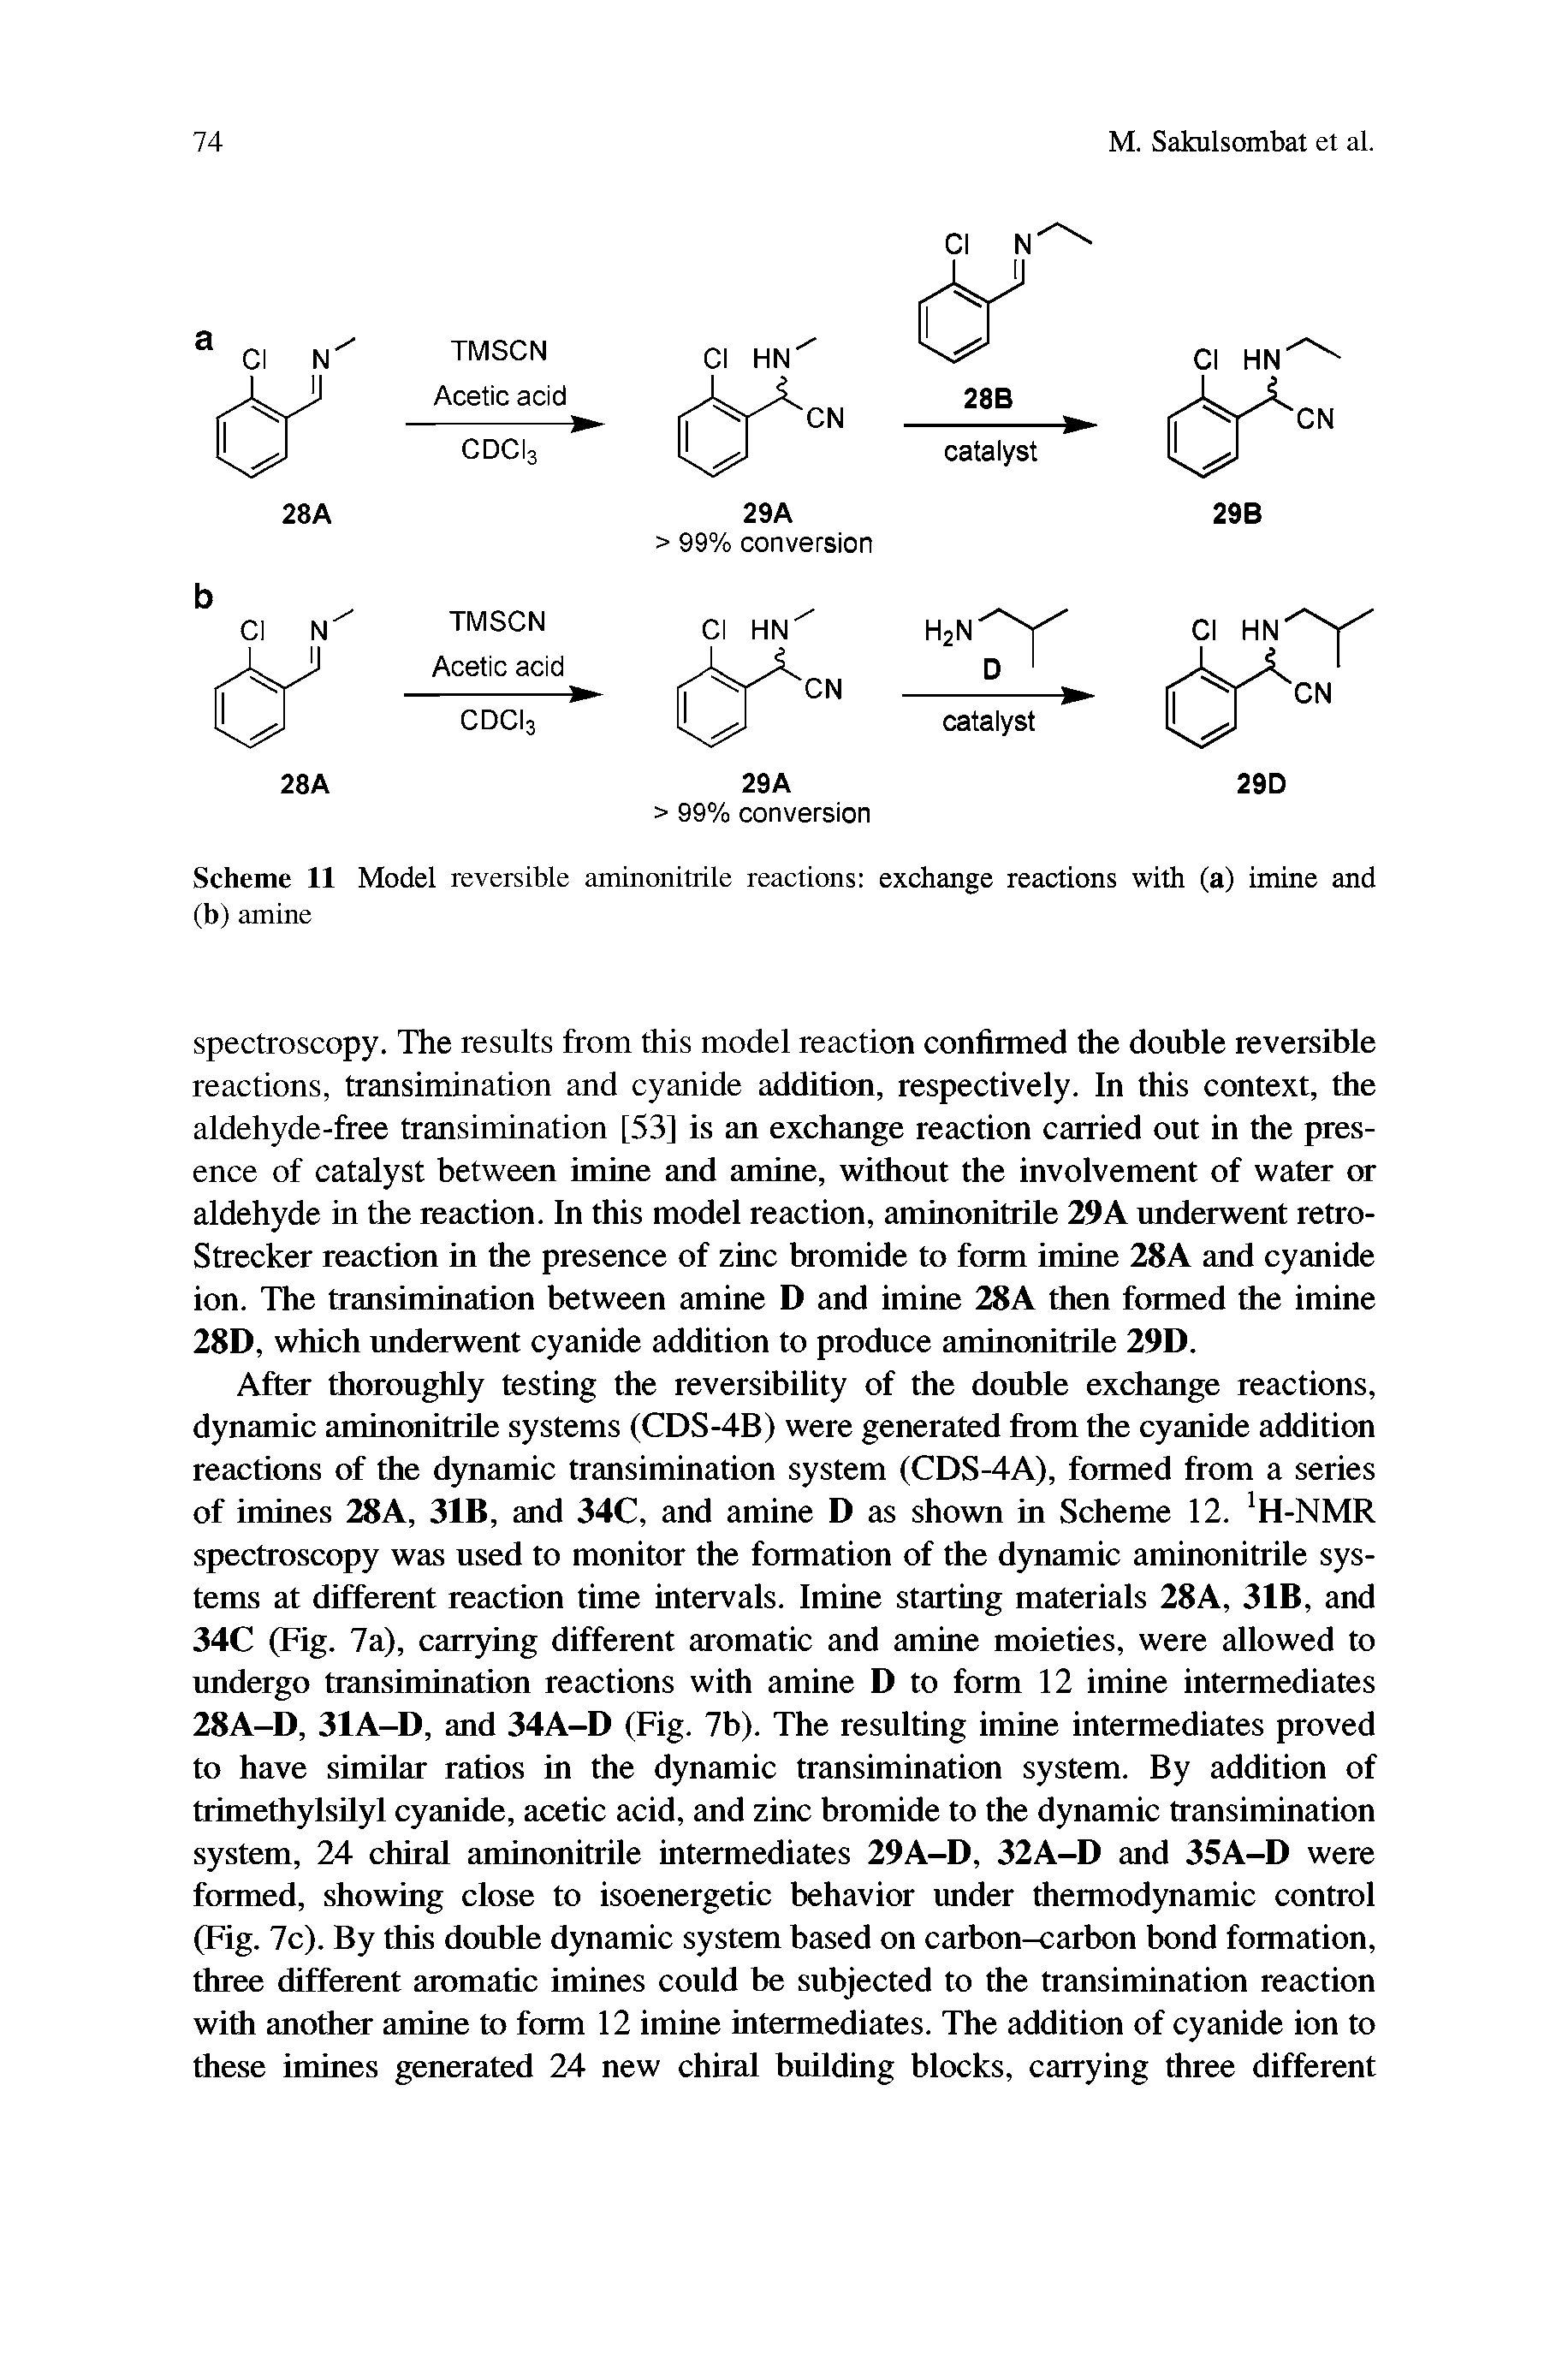 Scheme 11 Model reversible aminonitrile reactions exchange reactions with (a) imine and (b) amine...